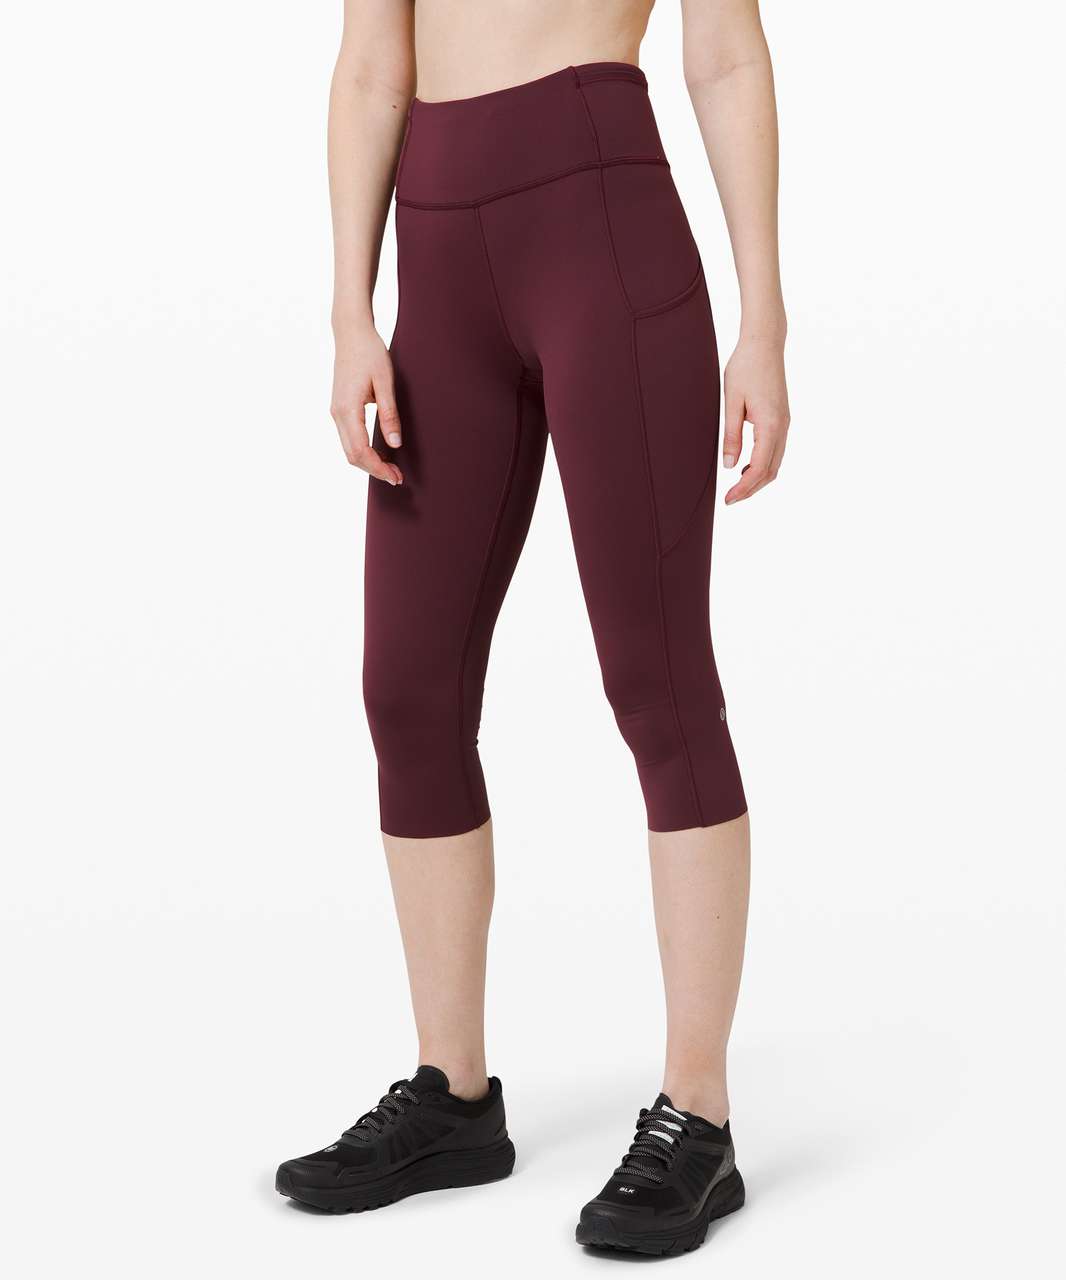 Lululemon Fast and Free Crop II 19" *Non-Reflective - Cassis